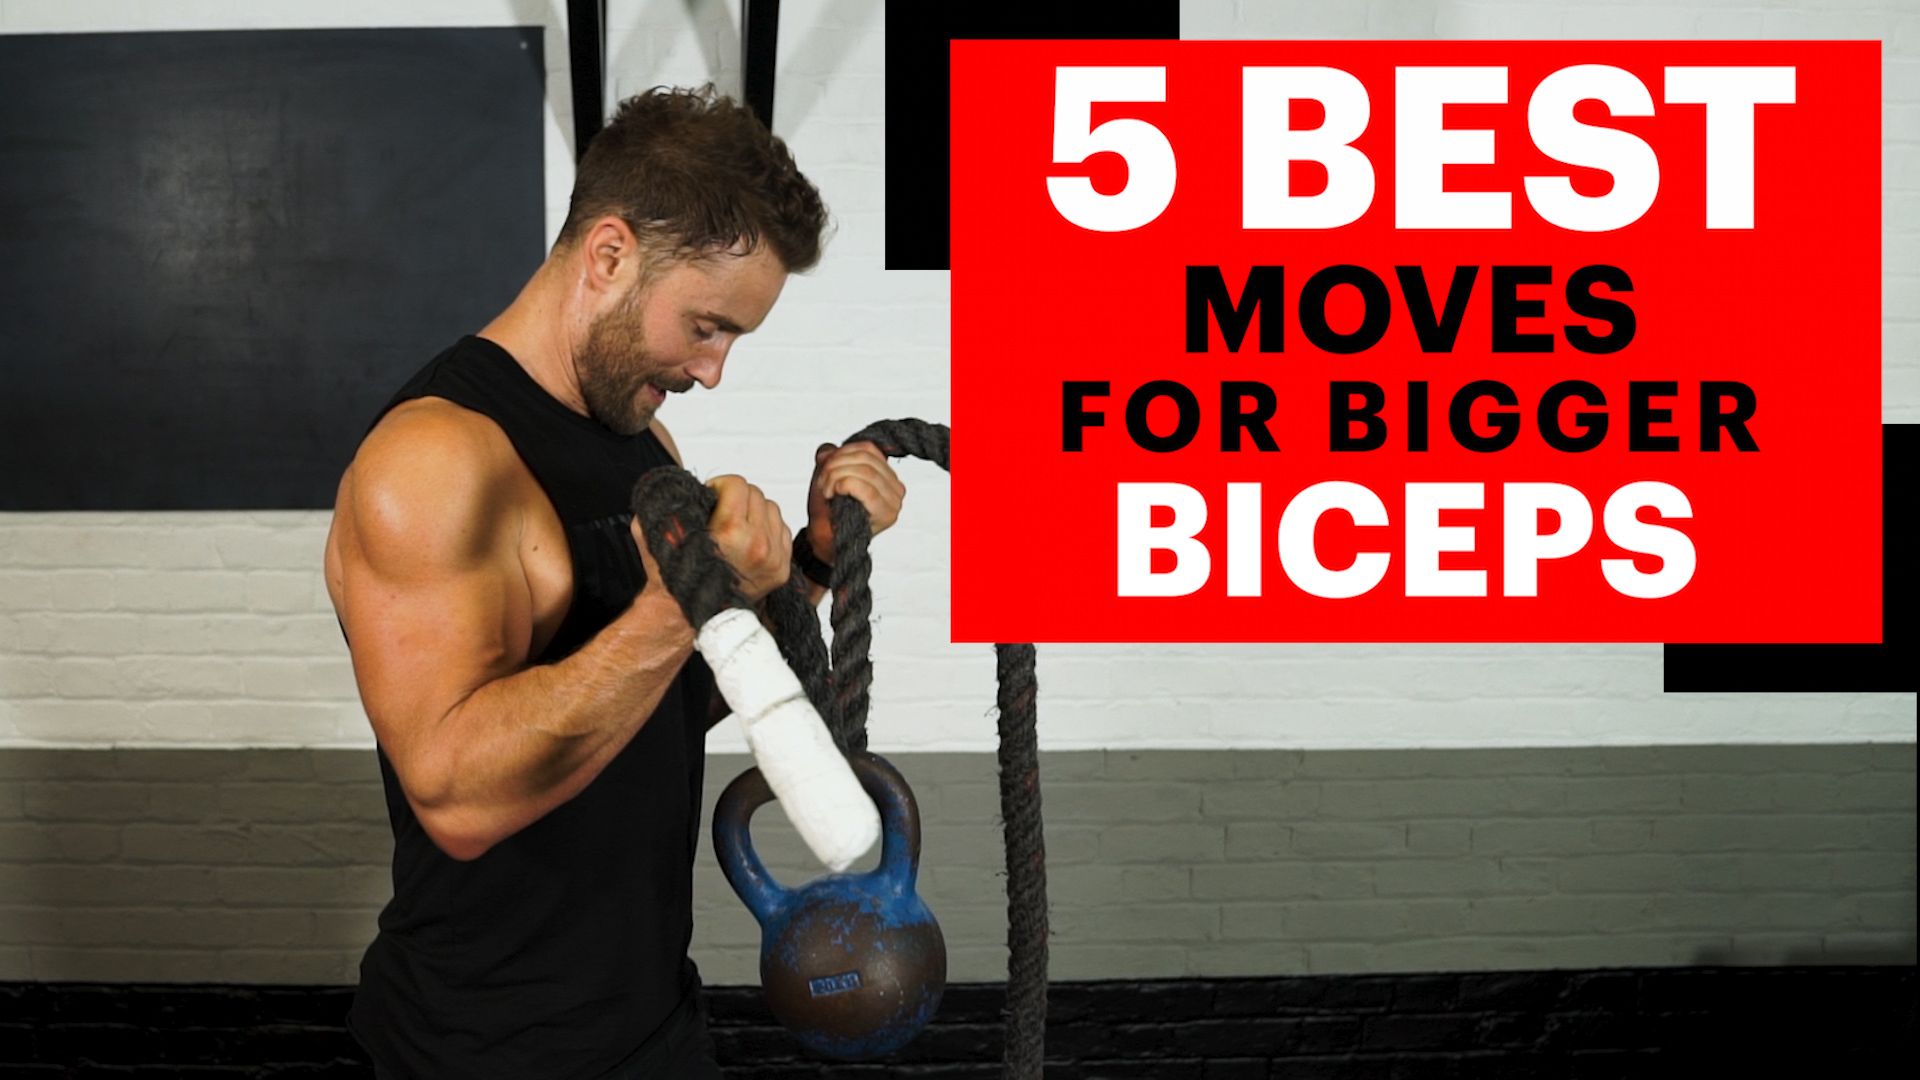 Big Arms Workout: Biceps & Triceps Exercises Printable Routine  Tricep  workout routine, Big arm workout, Bicep and tricep workout